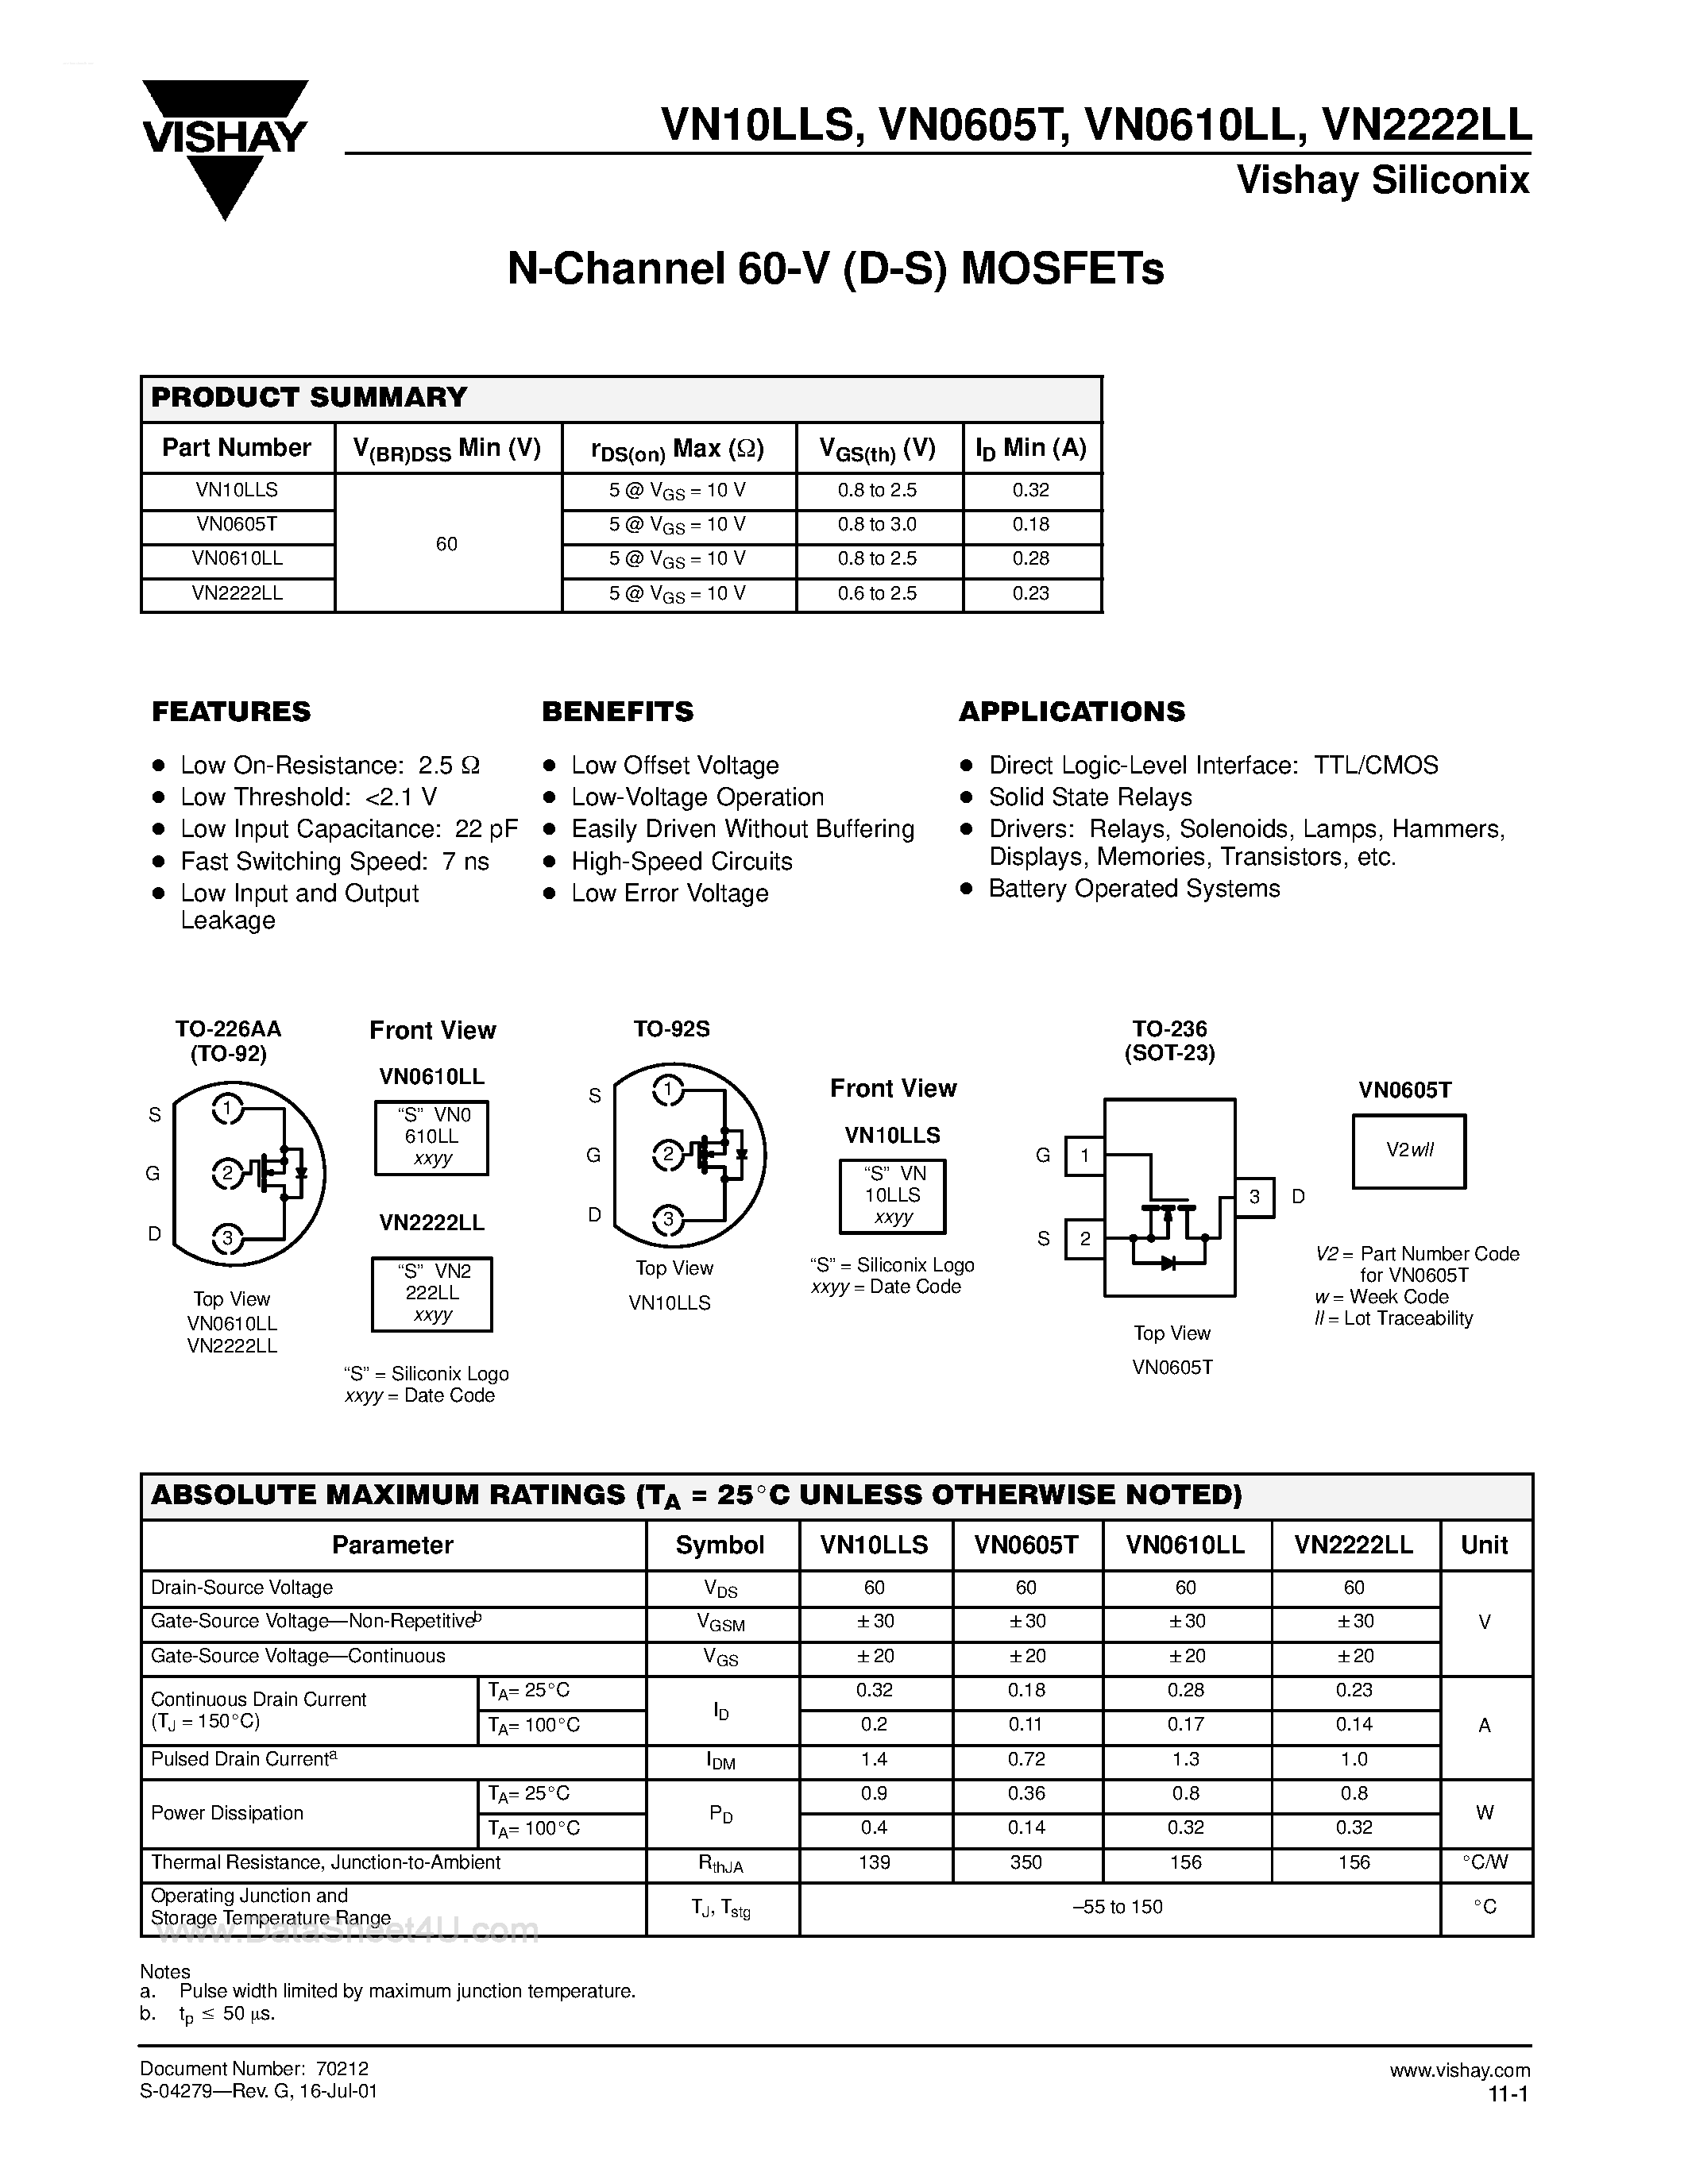 Datasheet VN2222LL - N-Channel 60-V (D-S) MOSFETs page 1